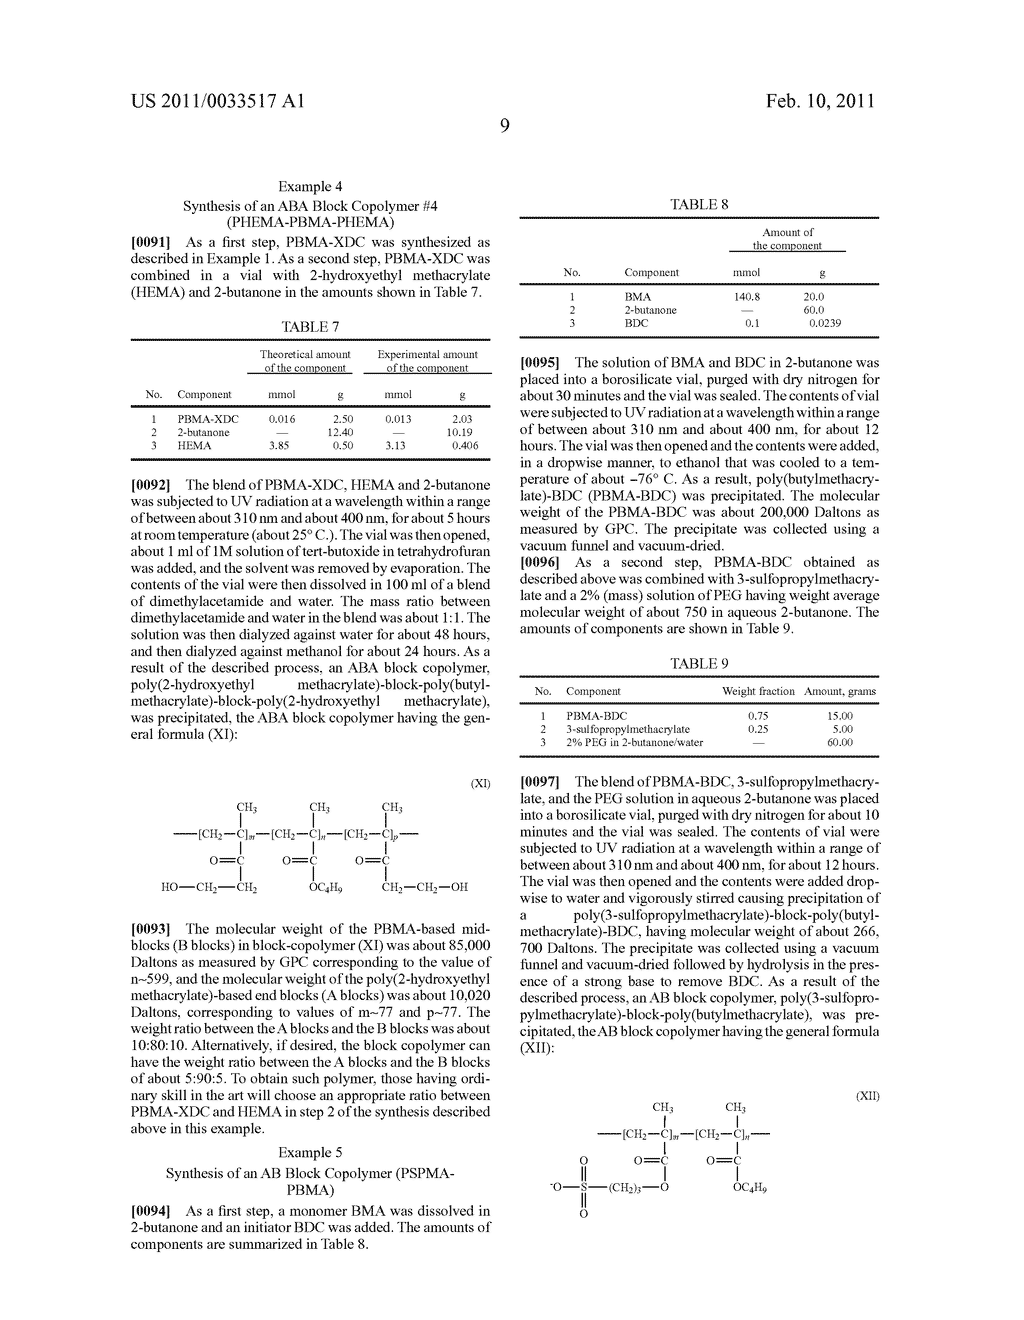 COATINGS FOR IMPLANTABLE MEDICAL DEVICES COMPRISING HYDROPHILIC SUBSTANCES AND METHODS FOR FABRICATING THE SAME - diagram, schematic, and image 16